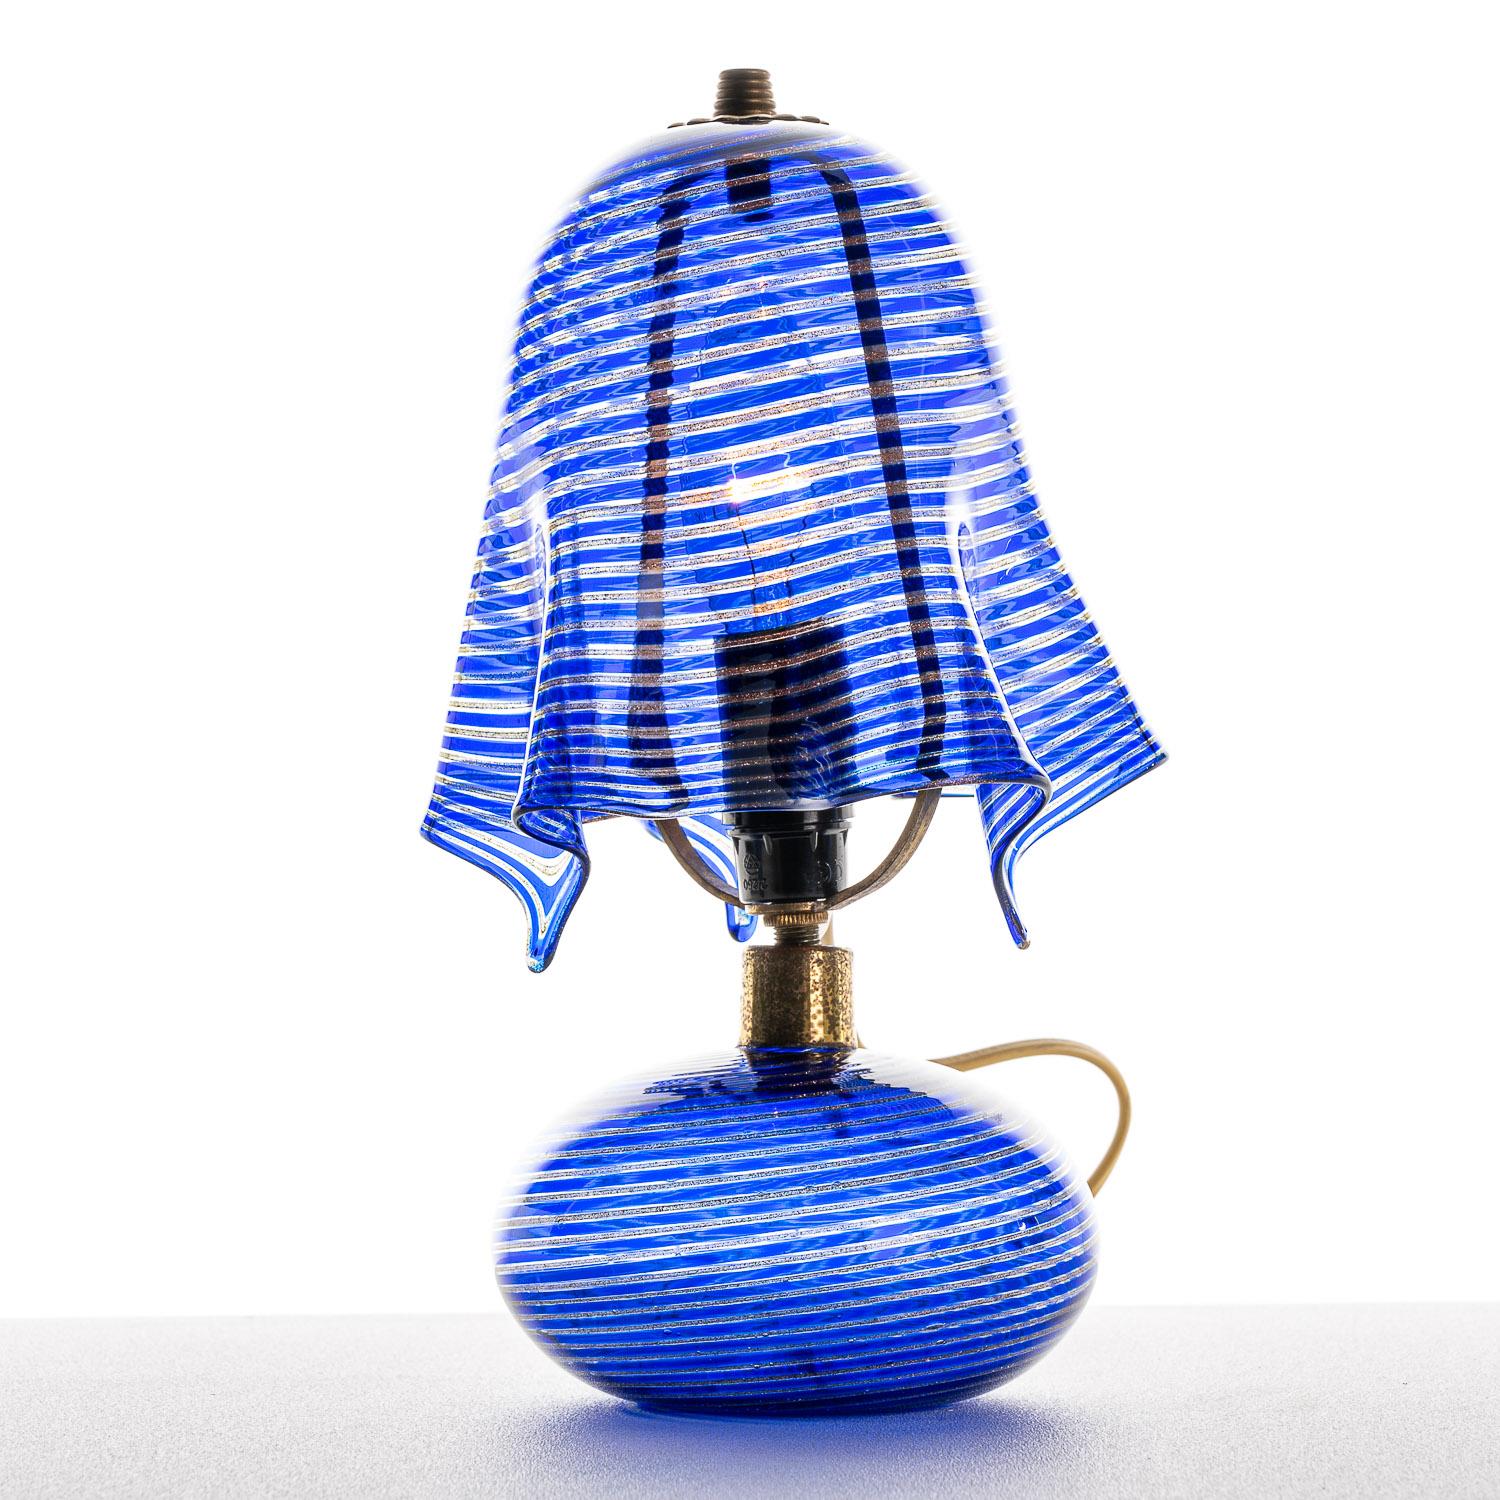 This is a highly creative lamp from designer Venini. Drawing on Murano's reputation for unique and colorful glasswork, the blue, flowing design used here gives a soft illumination, complementing the flowing lines on the base and shade.